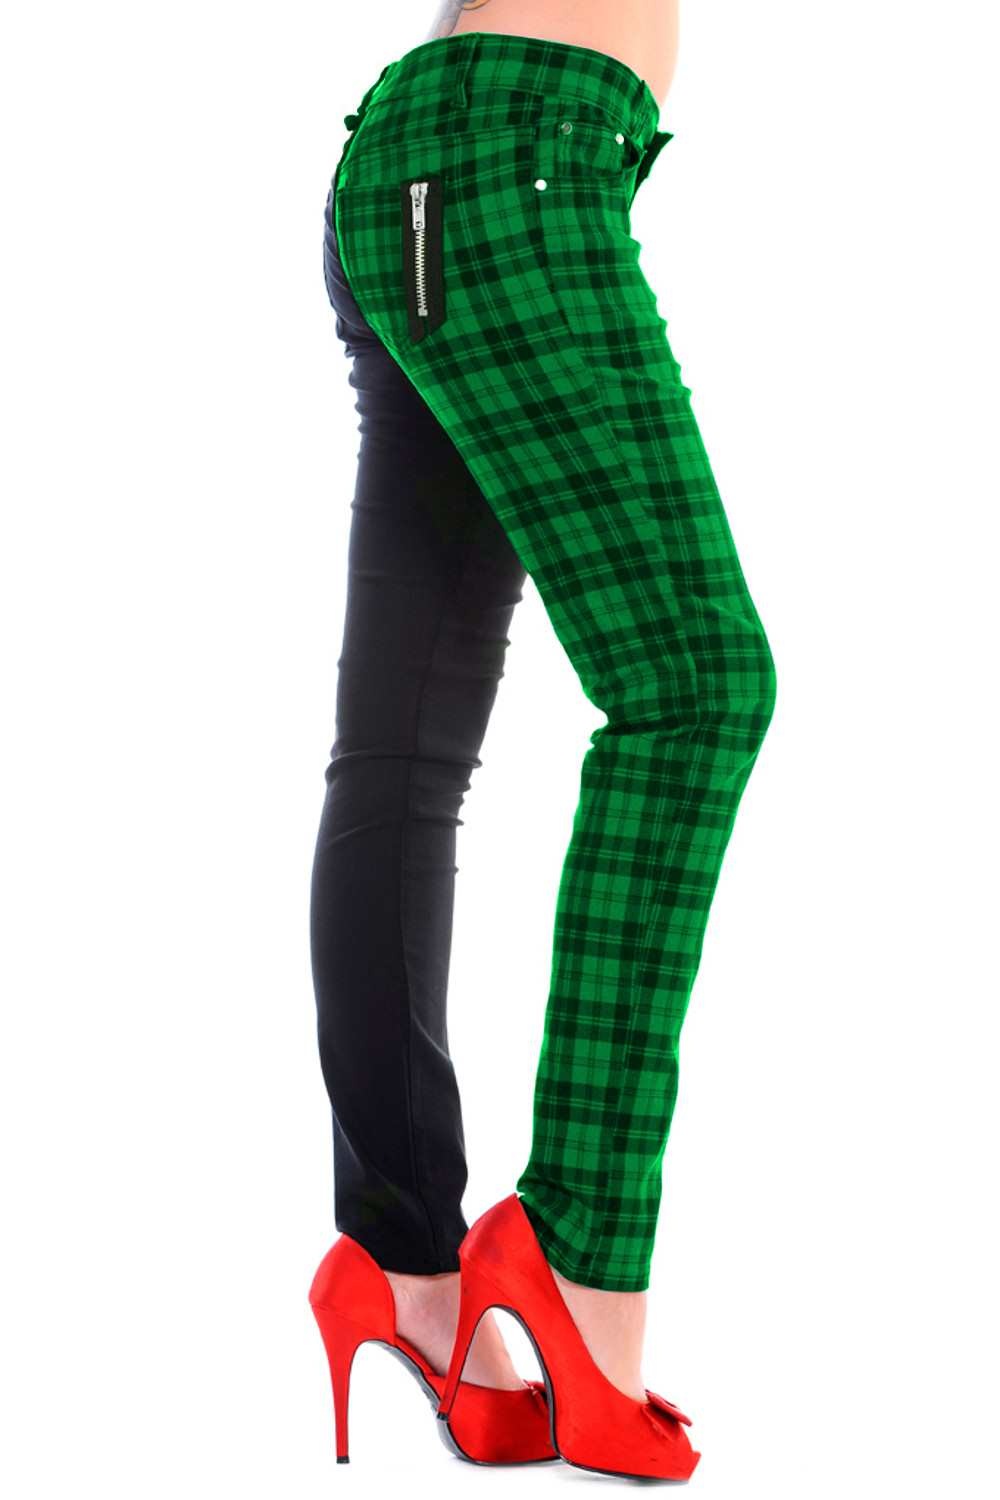 Low rise skinny jeans with one black leg and one green check leg